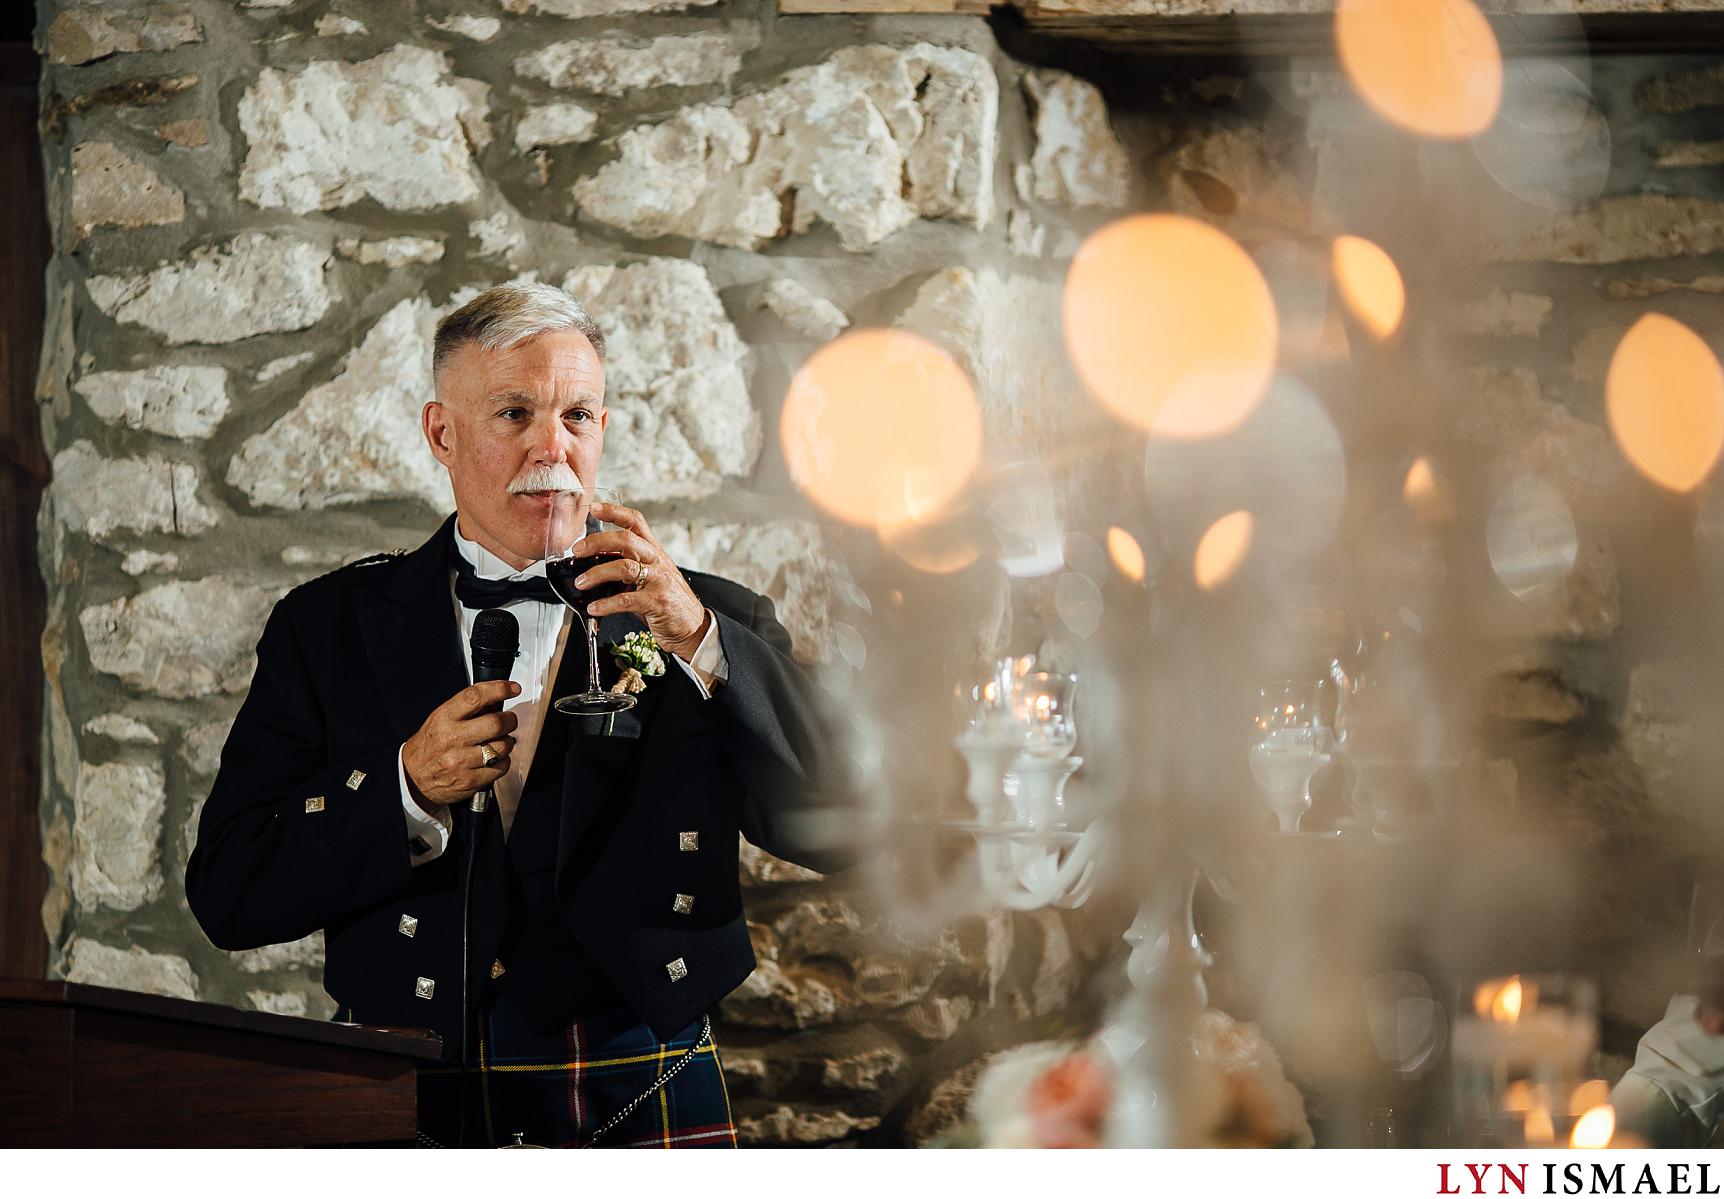 Father of the bride toasts to the bride and groom at a wedding at a Waterloo Region venue.